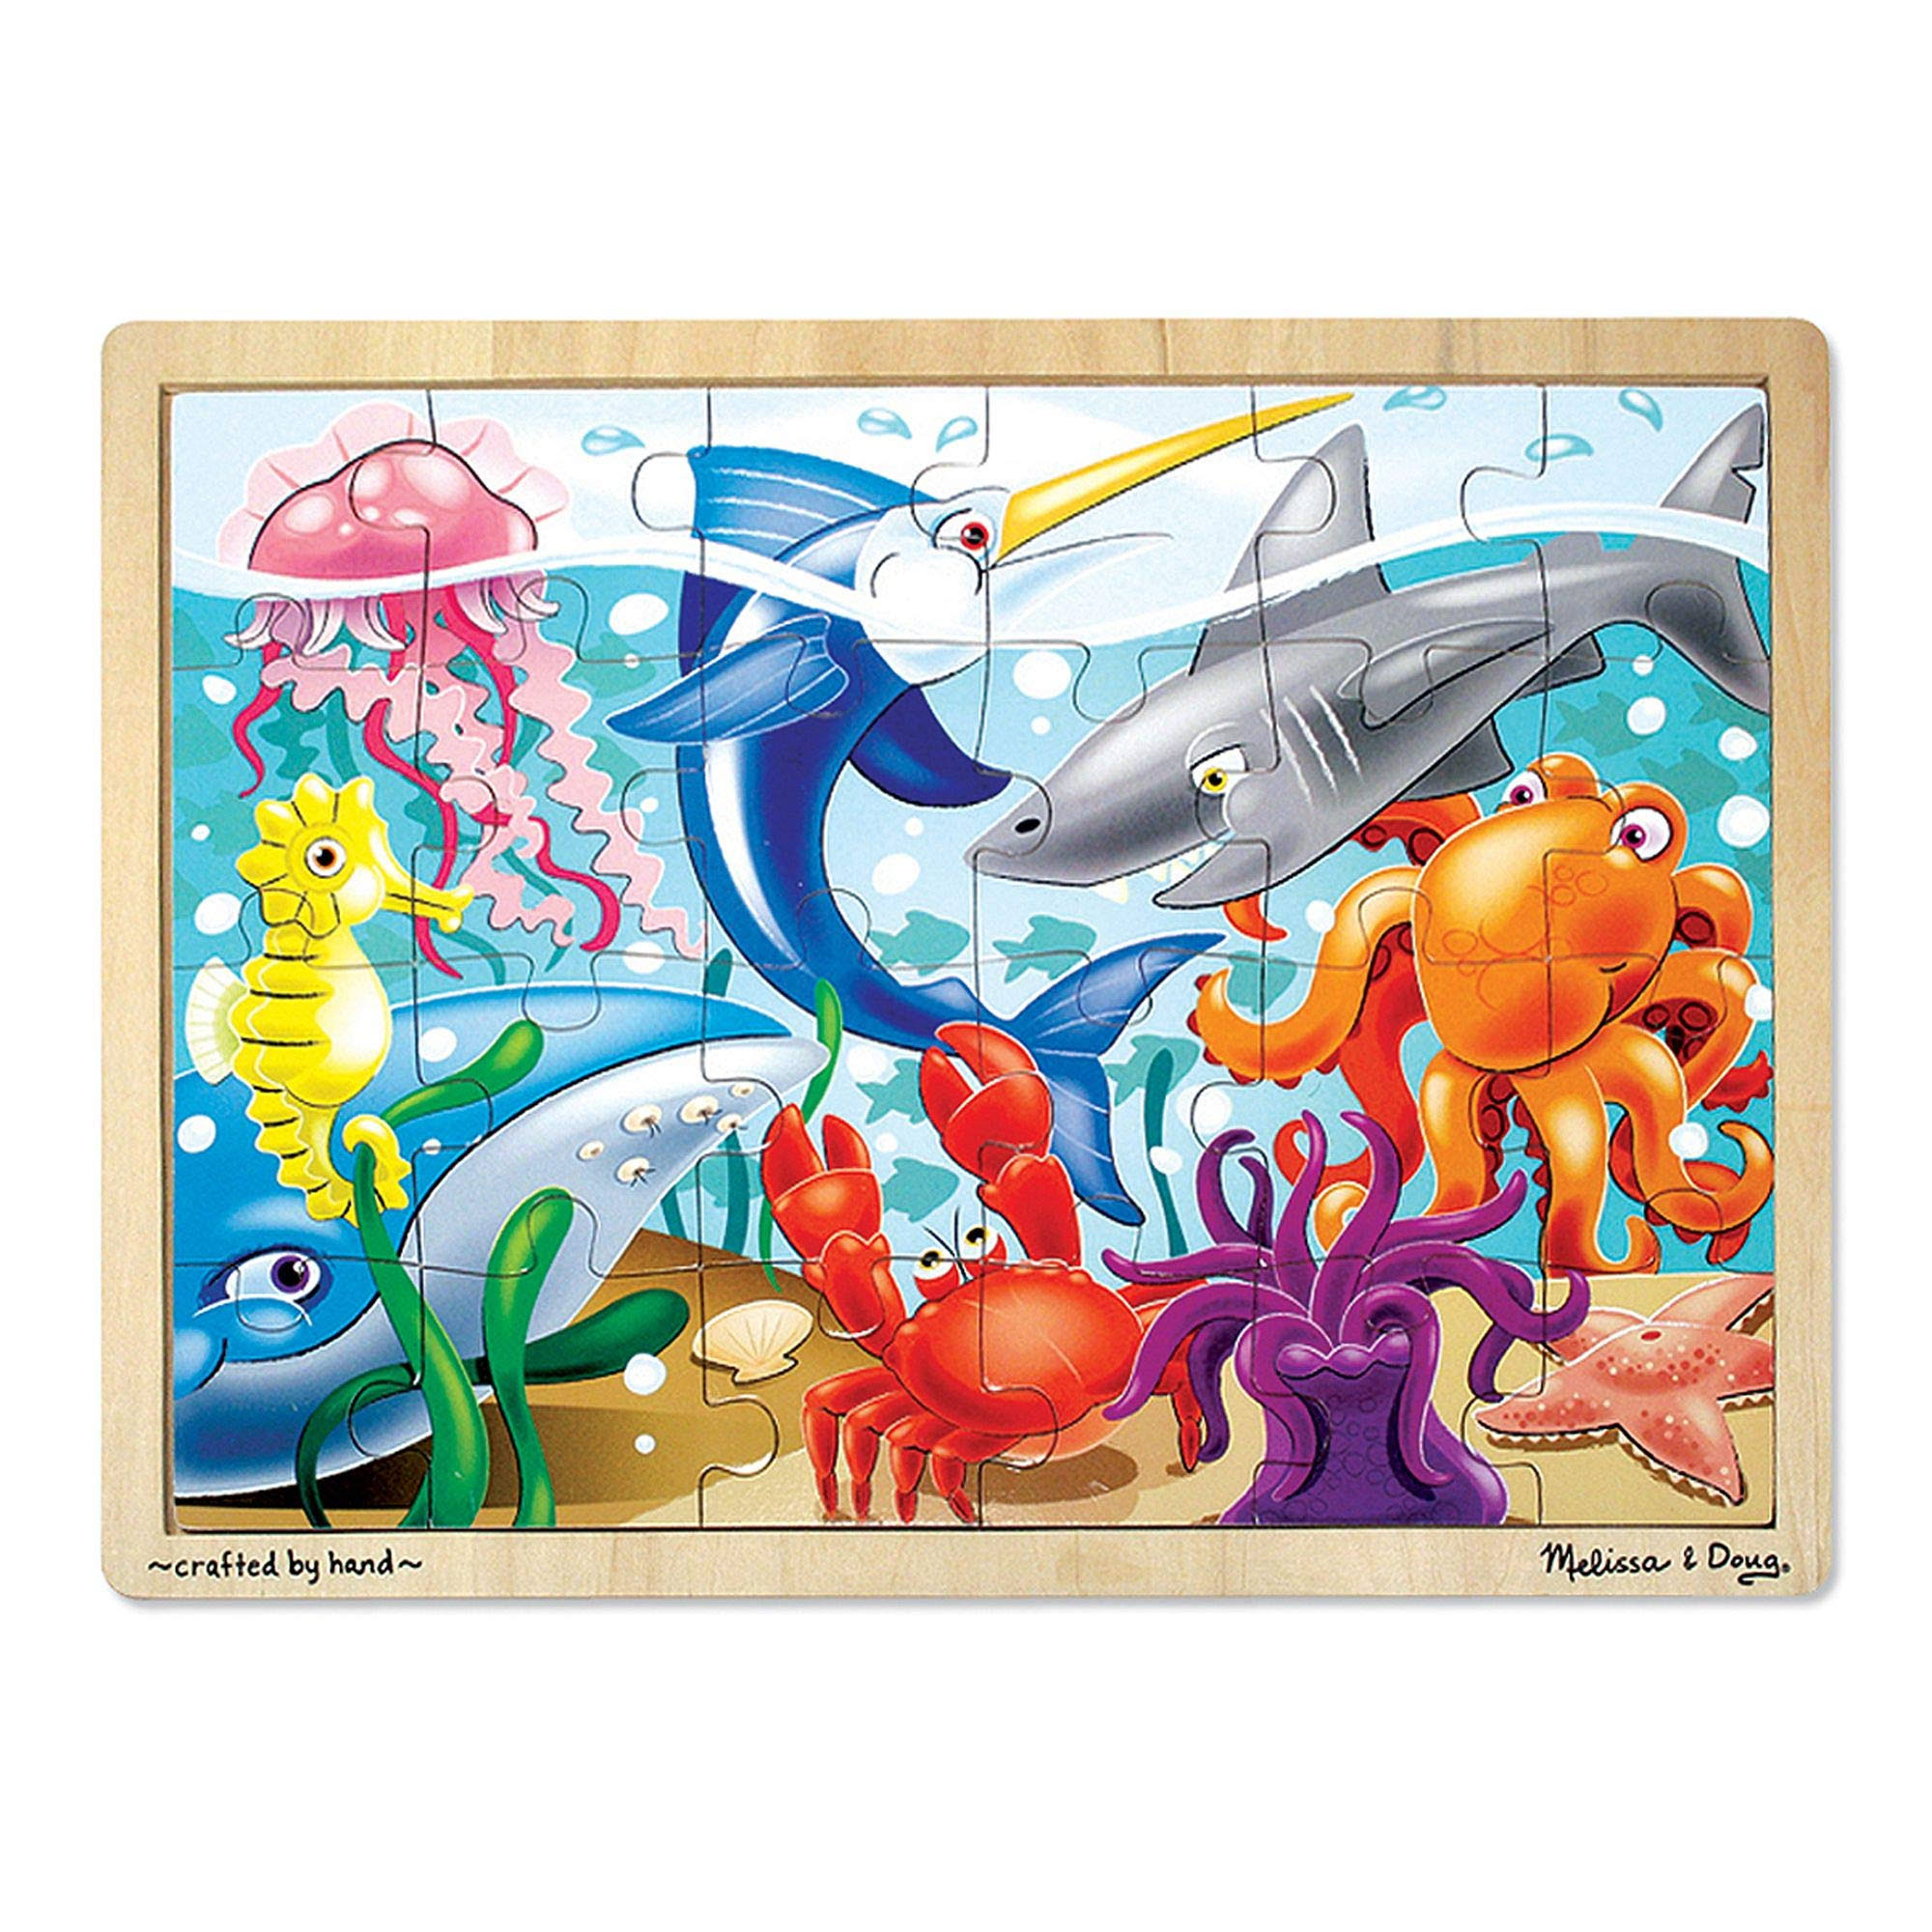 Melissa and Doug Under the Sea Jigsaw Puzzle - 24pc